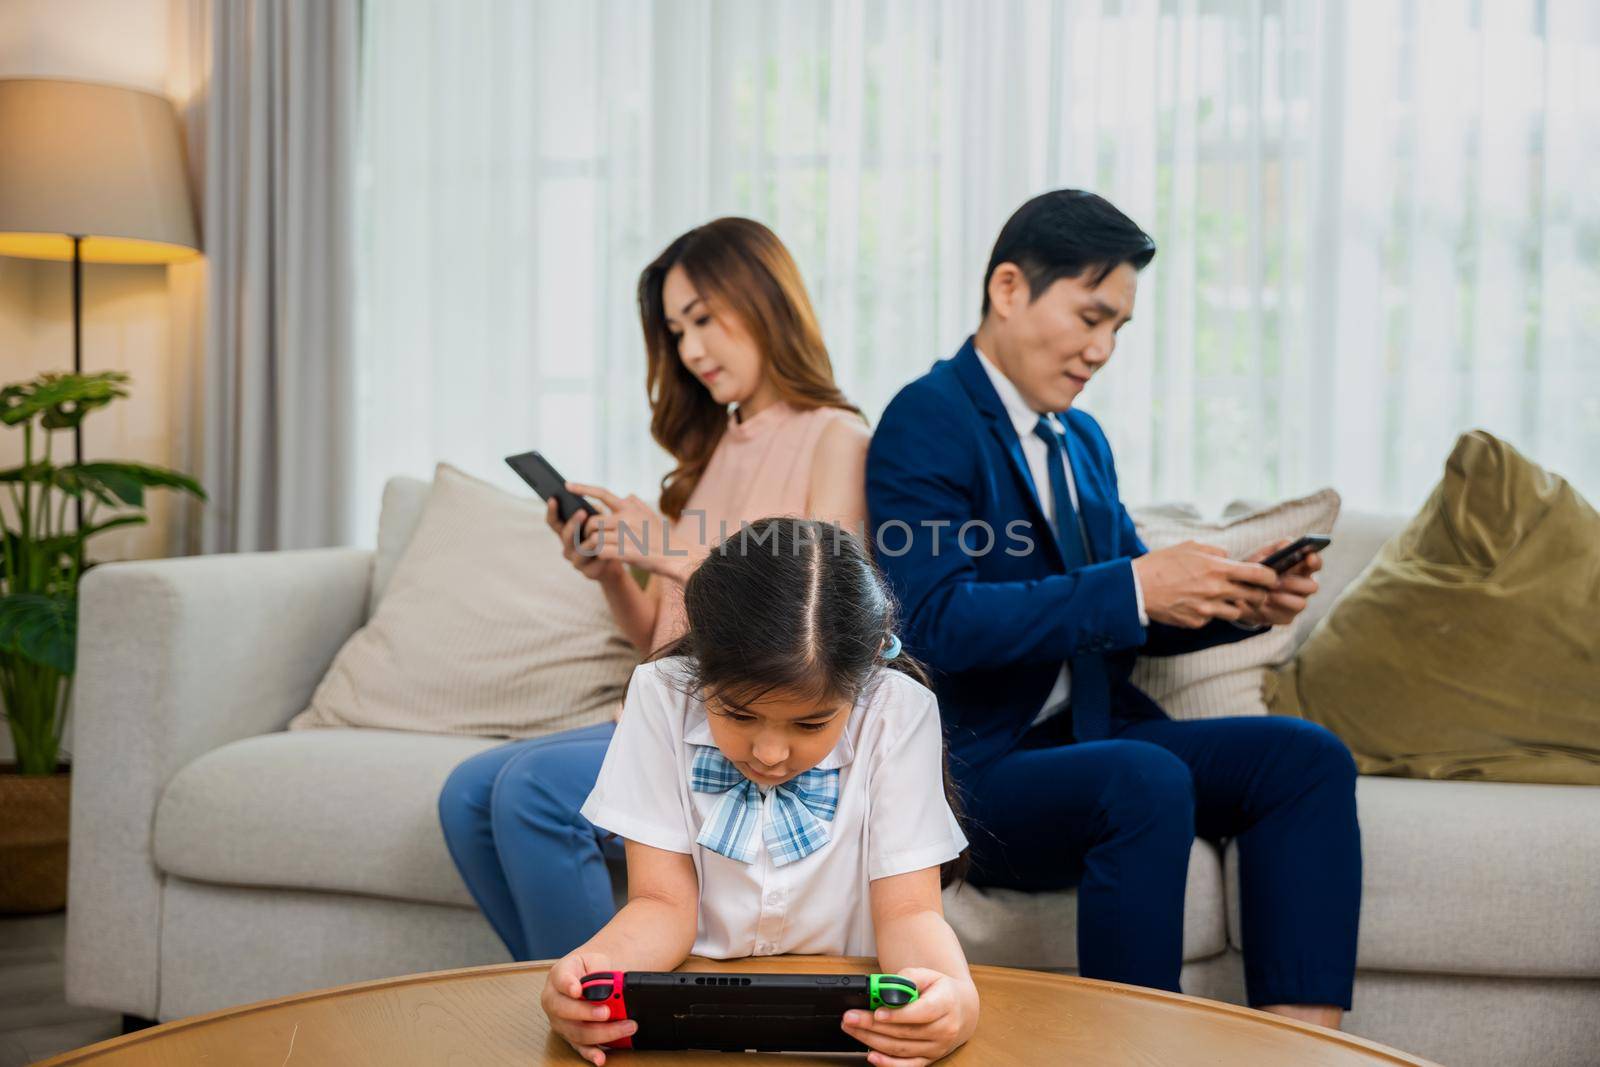 Family don't care about each other. Asian parents ignore their child and looking at their mobile phone at home, father and mother read social media but daughter play video game on sofa living room